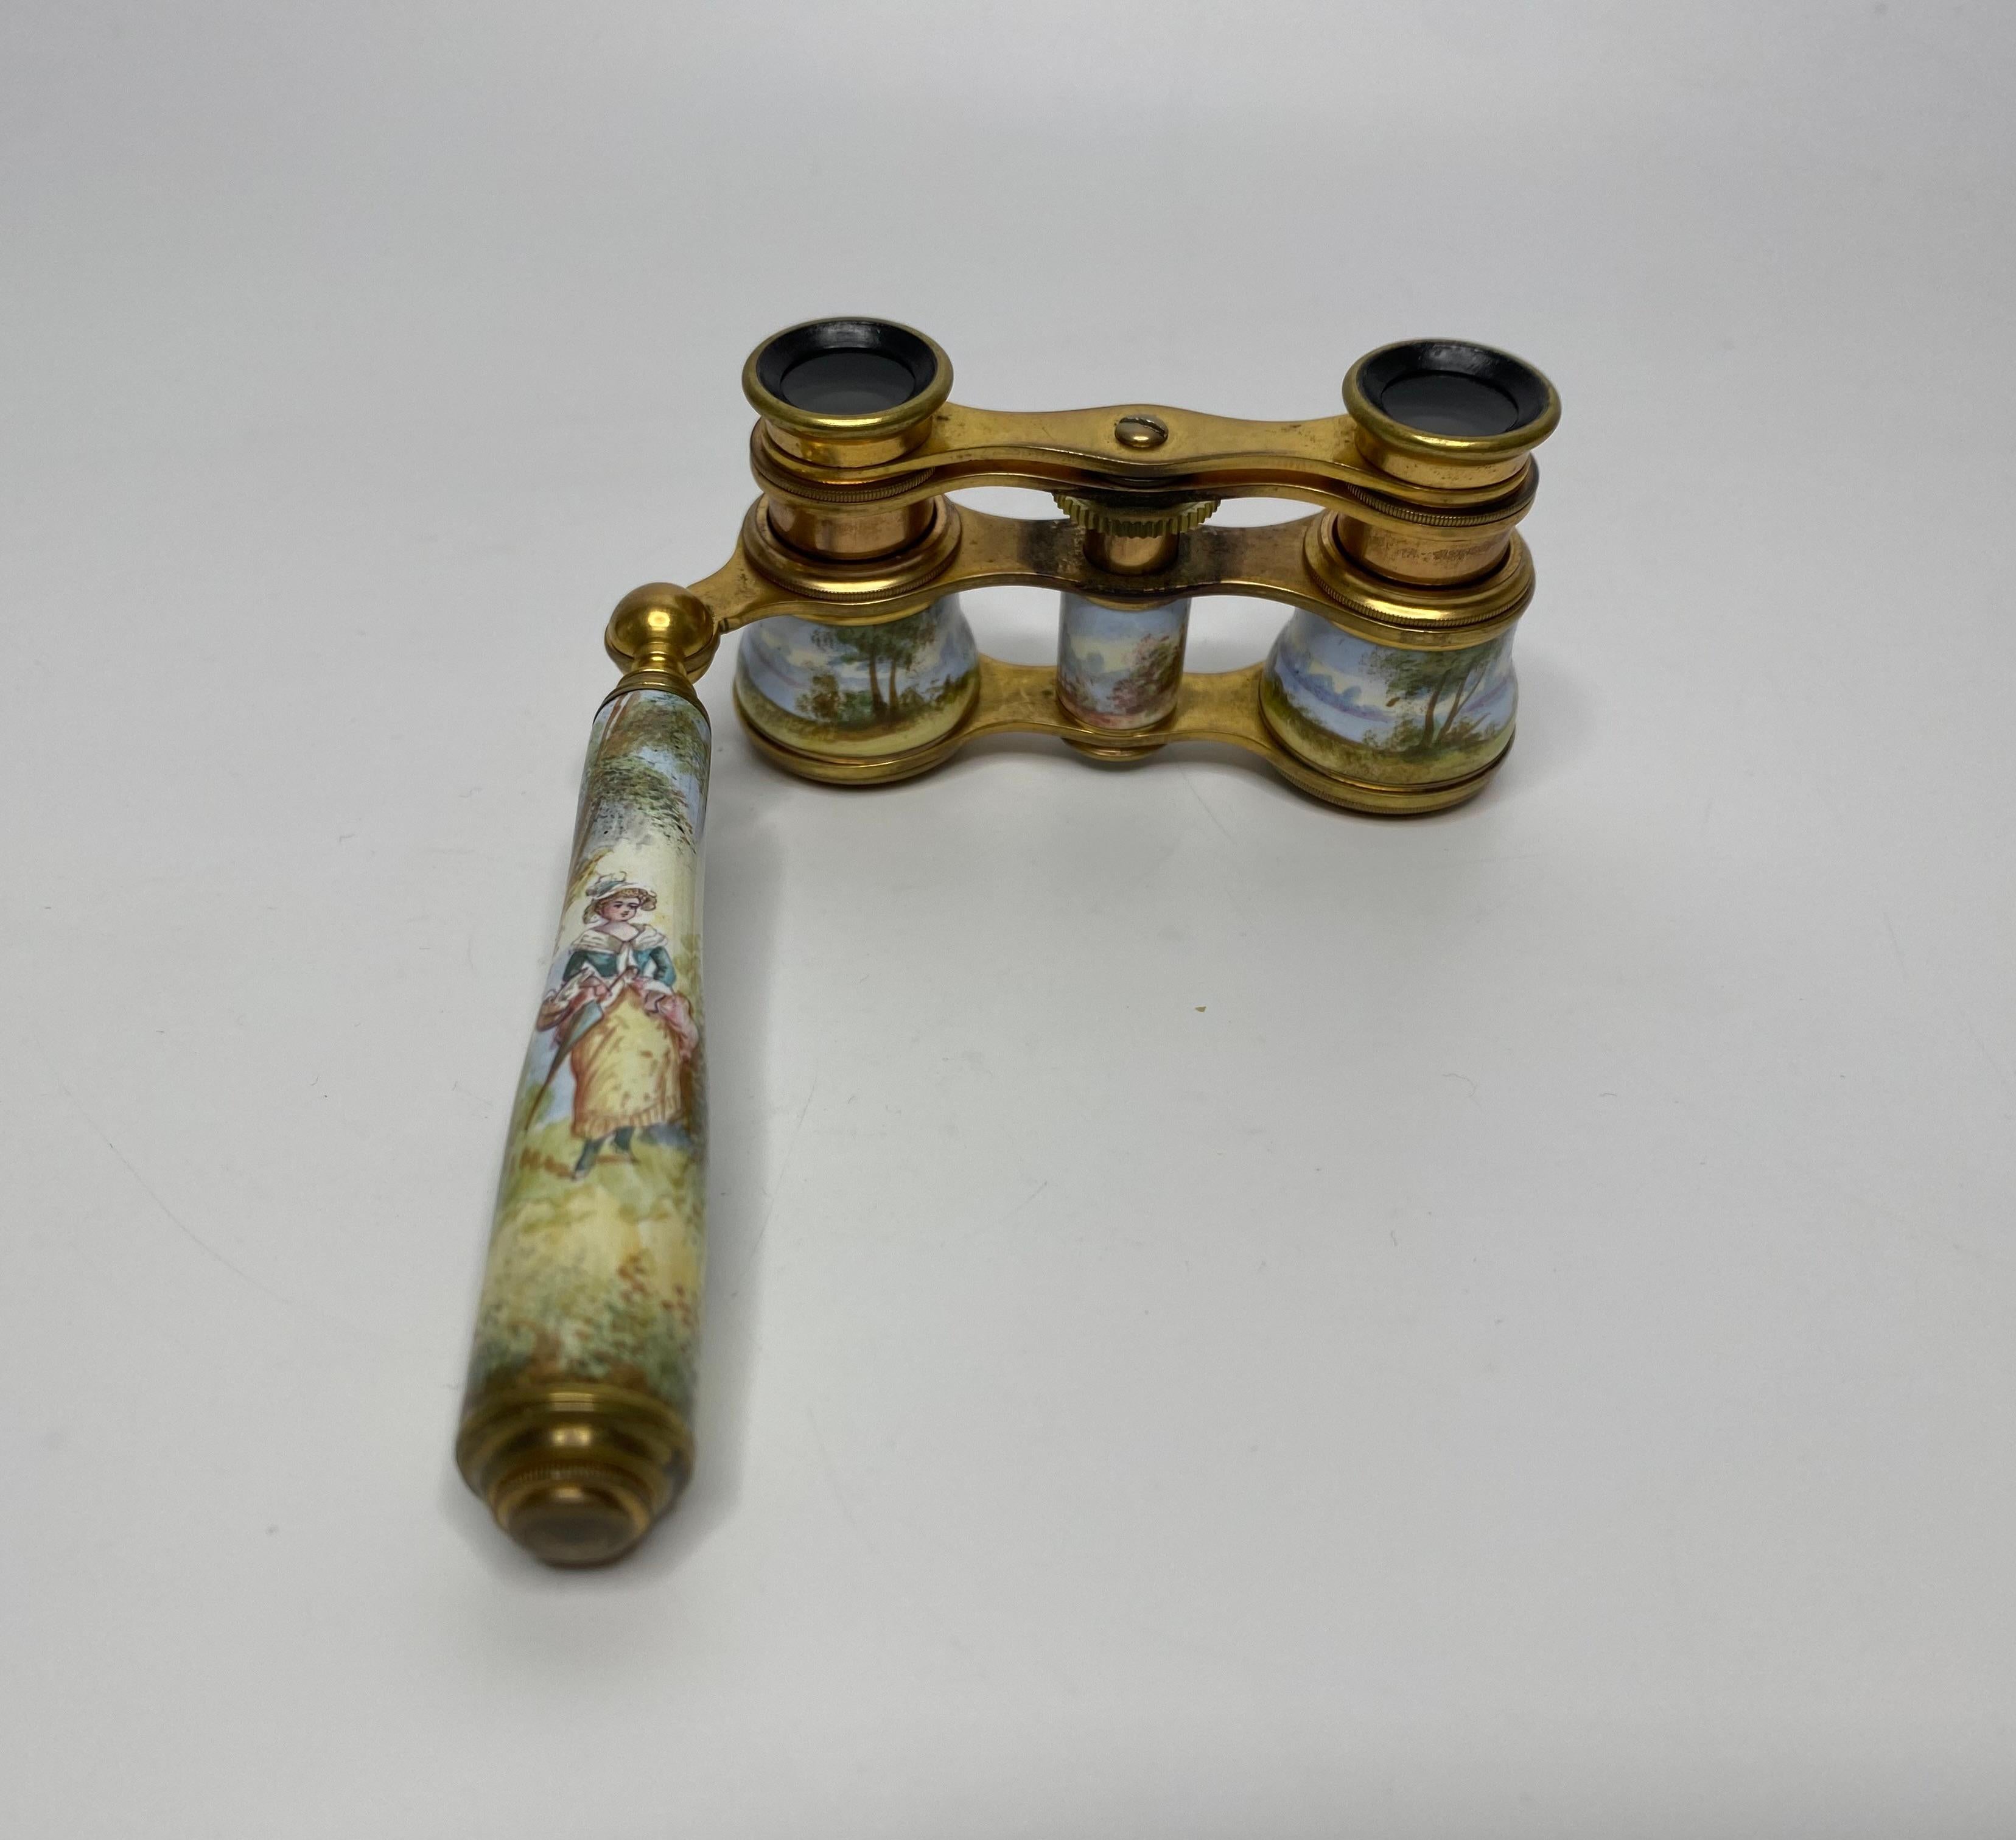 Viennese enamel opera glasses, c. 1900. The gilt metal opera glasses, having hand painted barrels of a couple wearing 18th Century costume, playing music in garden settings.
The handle with a young girl, walking in a rural setting.
Width – 10.5 cm,